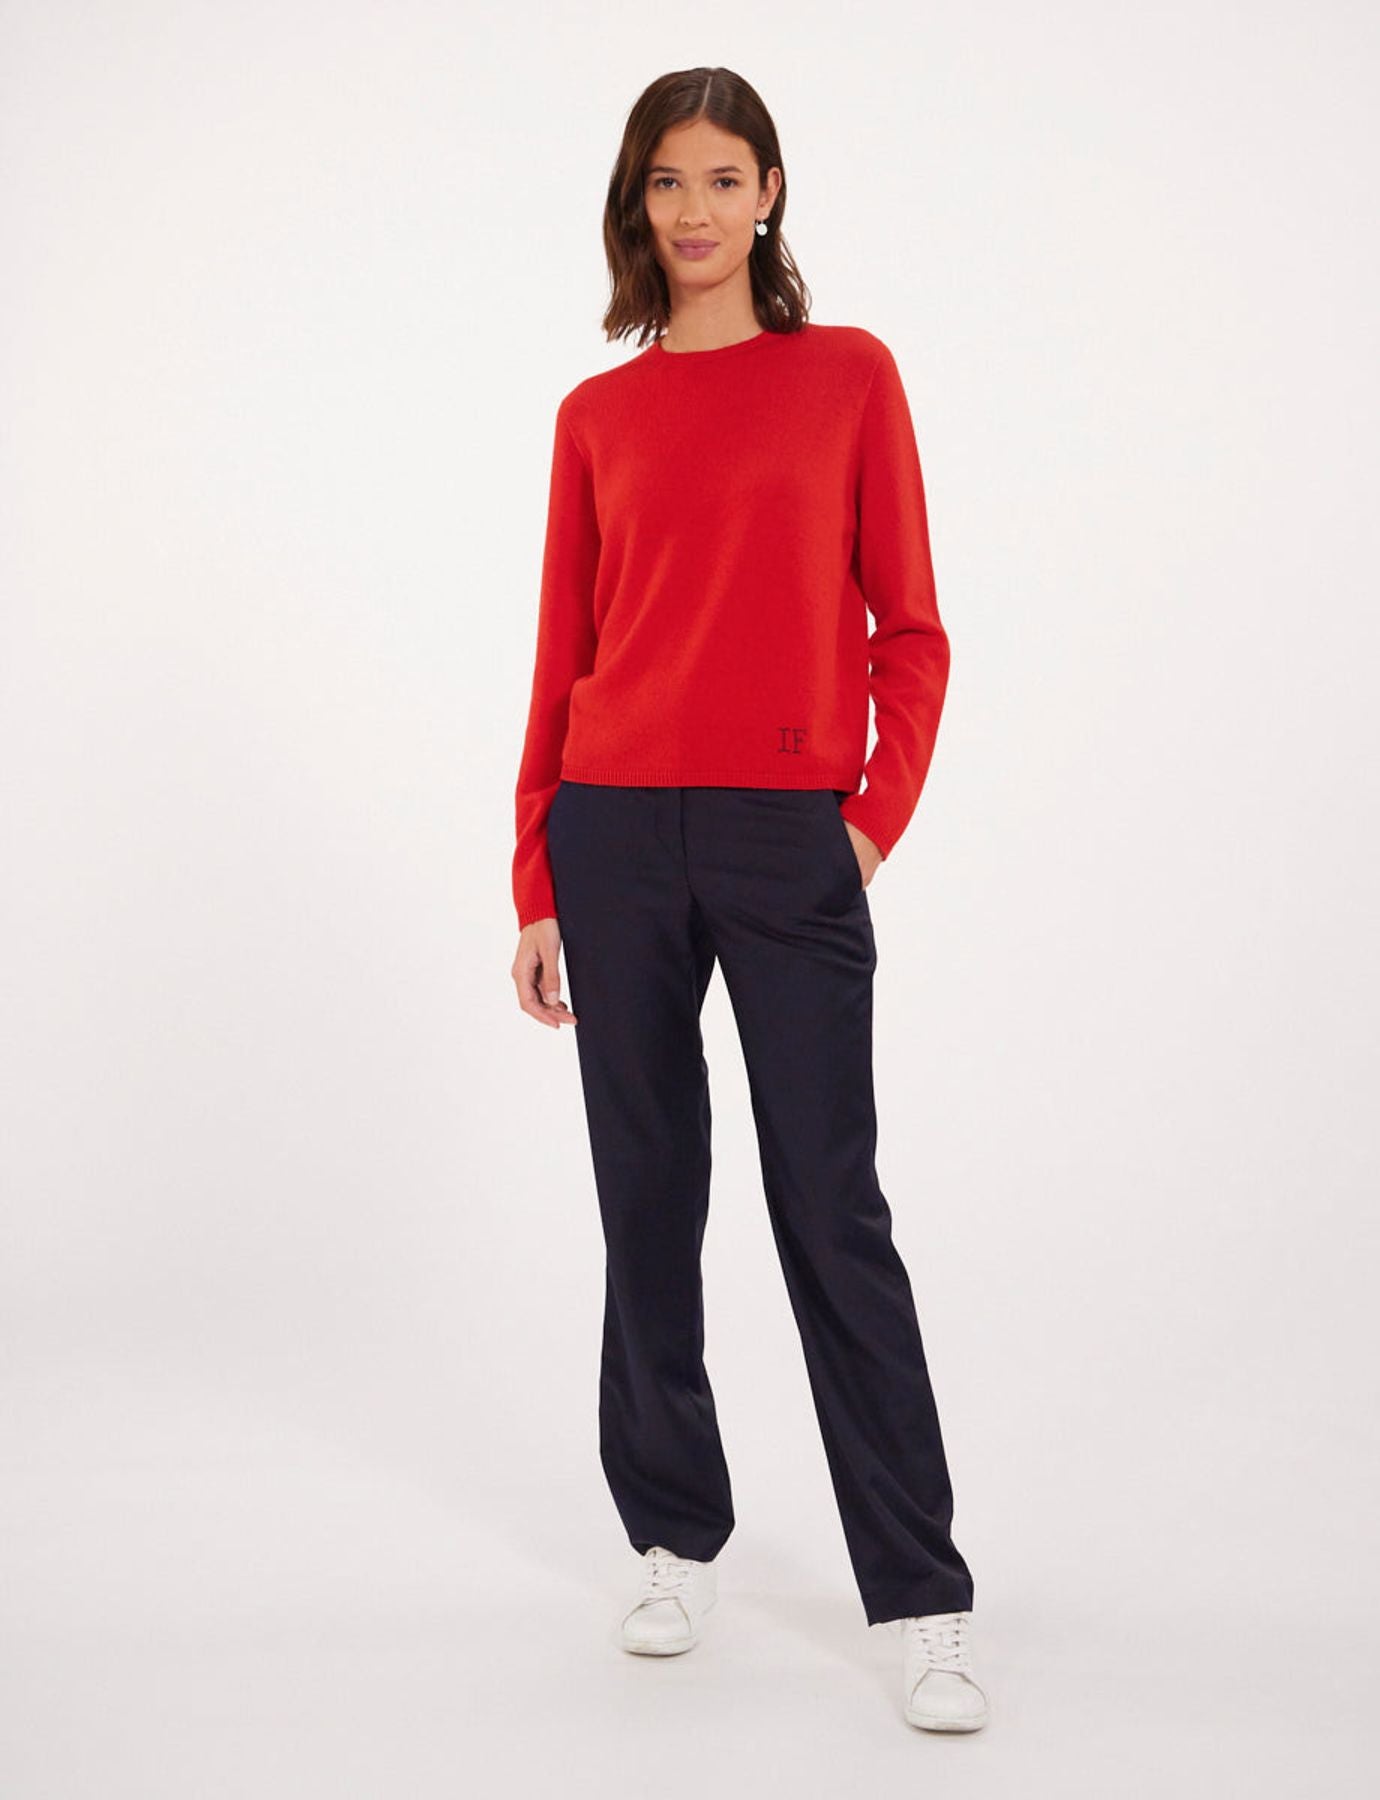 sweater-angelina-red